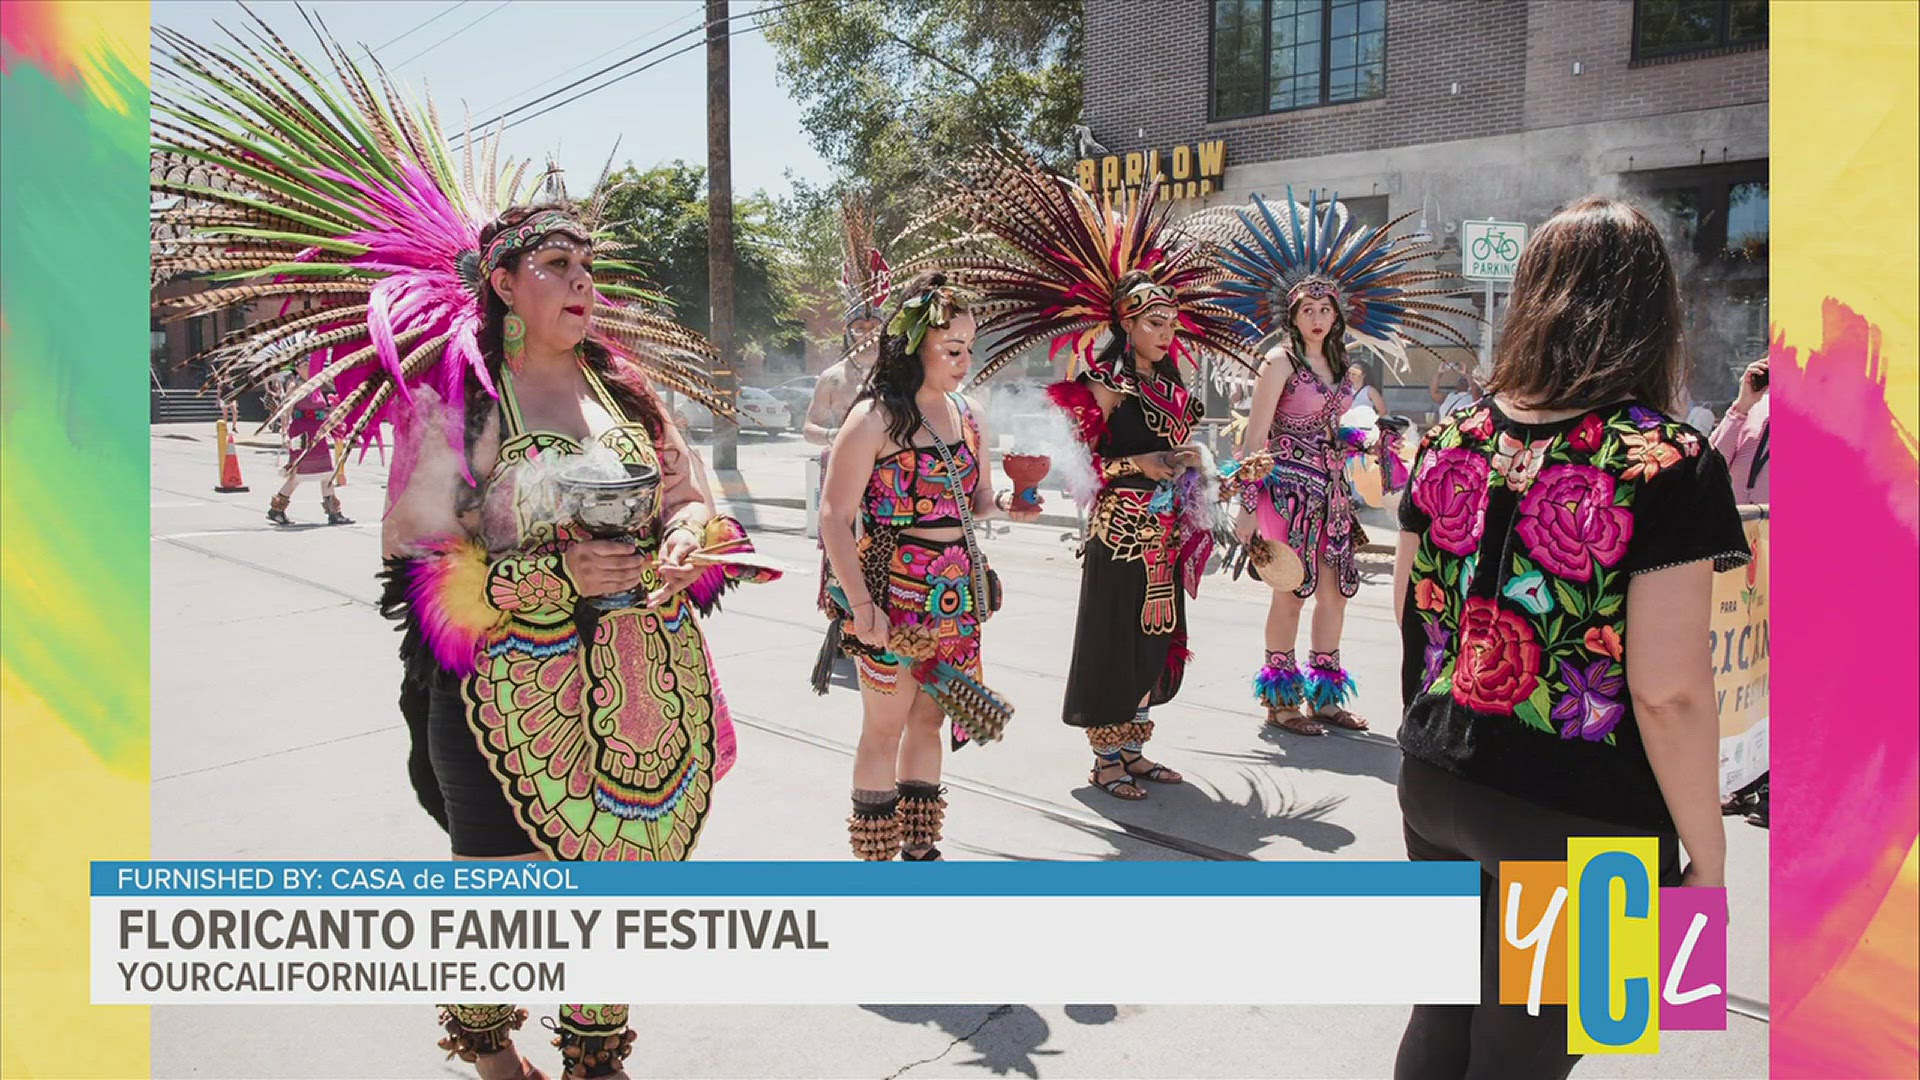 This local event celebrates Latinx cultures with food, vendors, activities for kids and much more. Check it out on May 11, 12-6 p.m. at 1101 R St. in Sacramento.